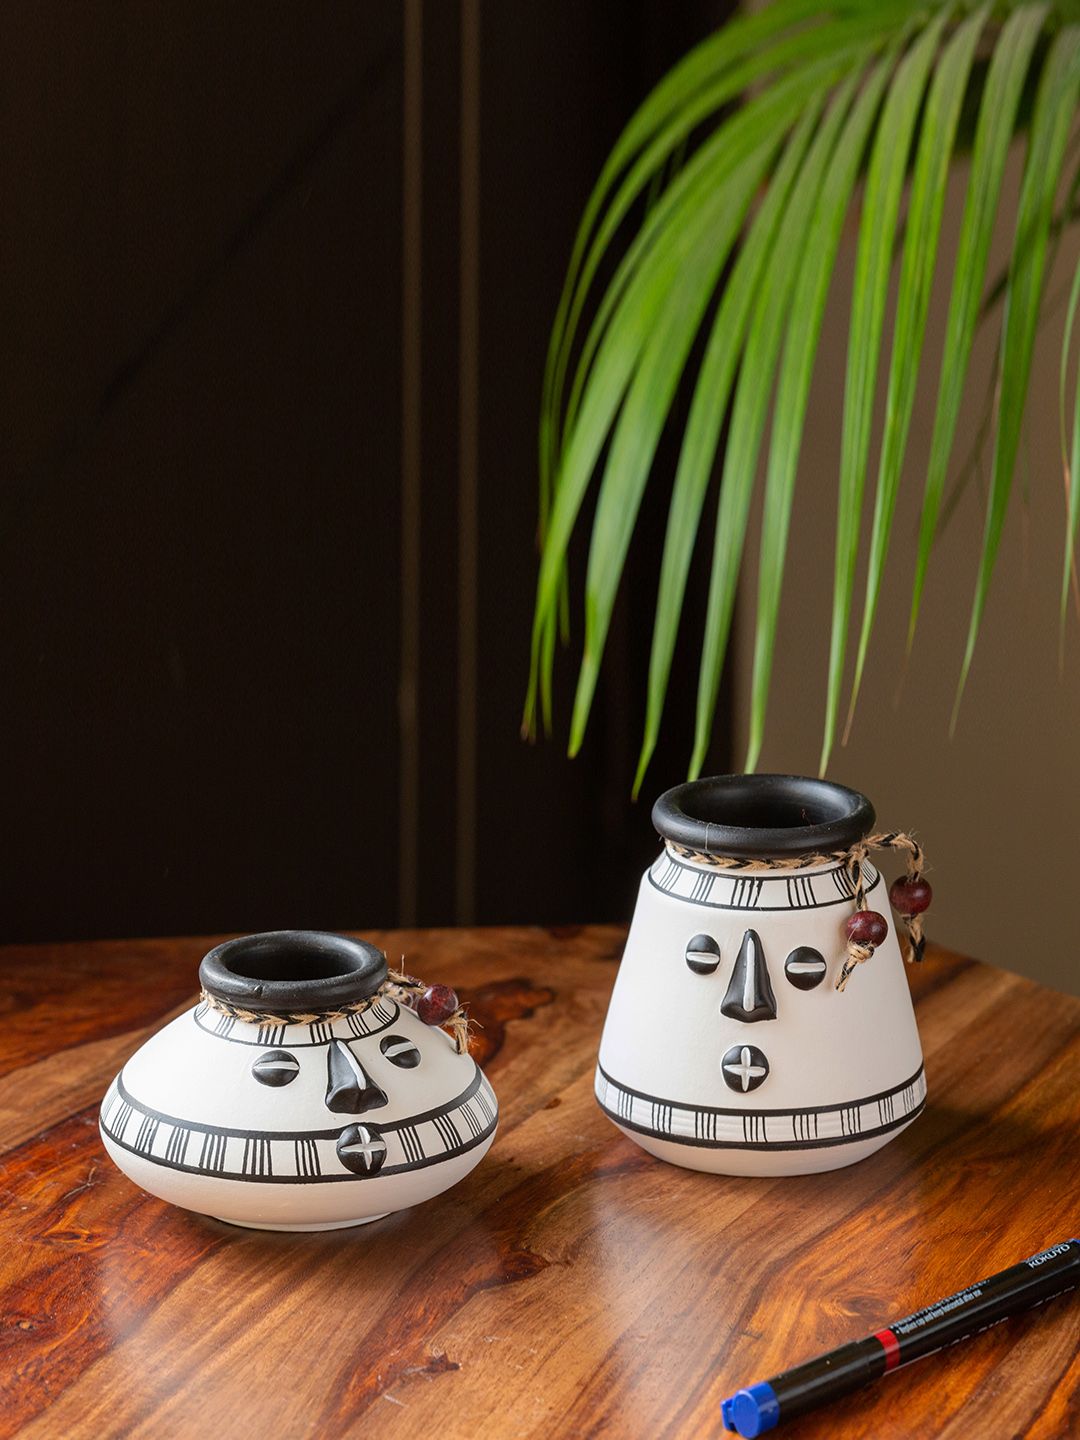 ExclusiveLane Set Of 2 White & Black Hand Painted Terracotta Miniature Pots Price in India